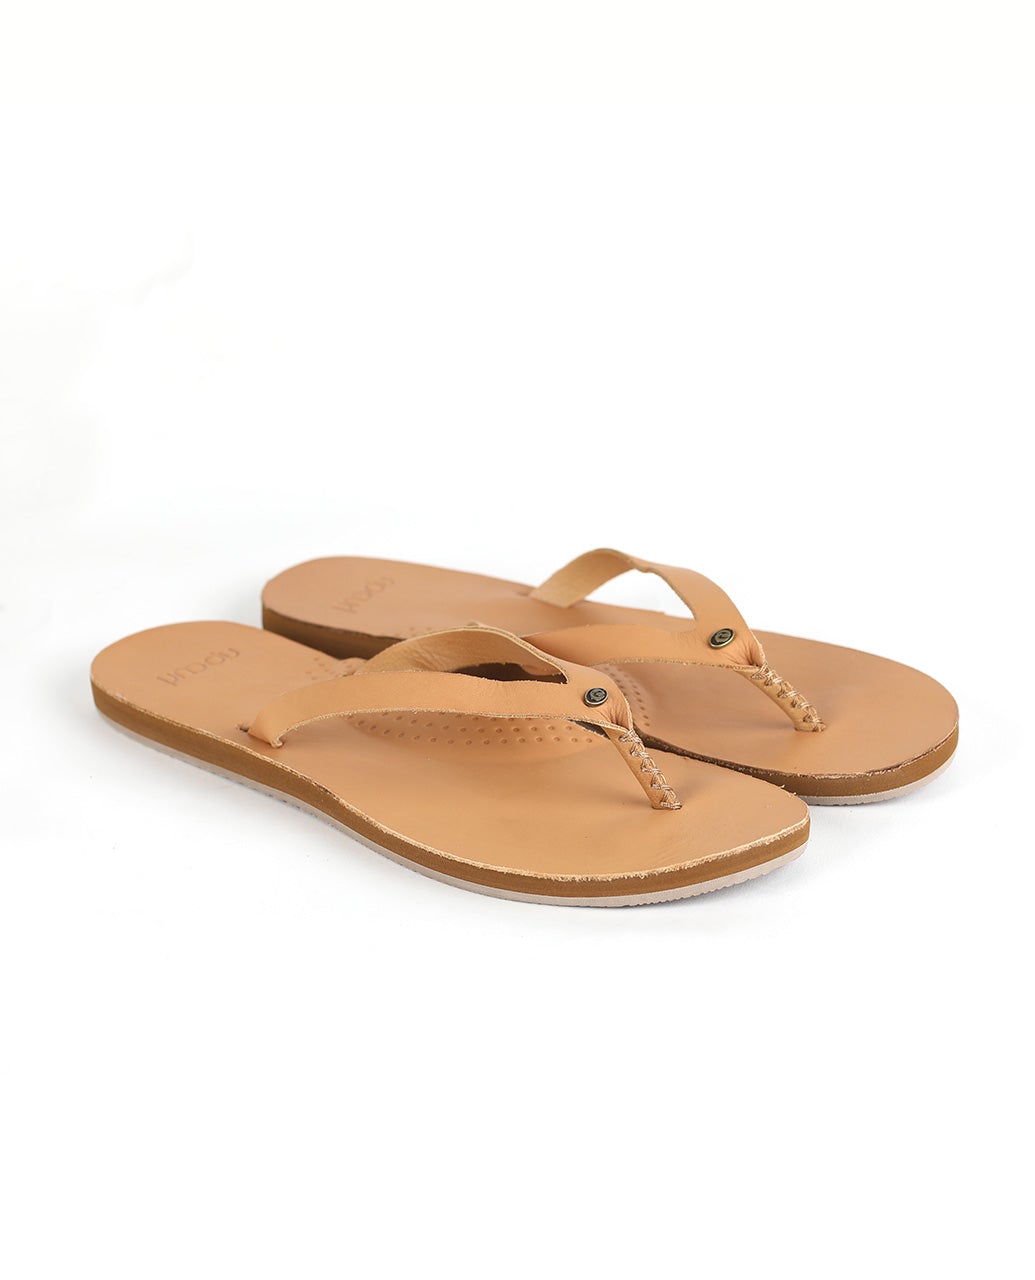 New Moon Thongs - Surf Footwear for womens – Rip Curl Indonesia